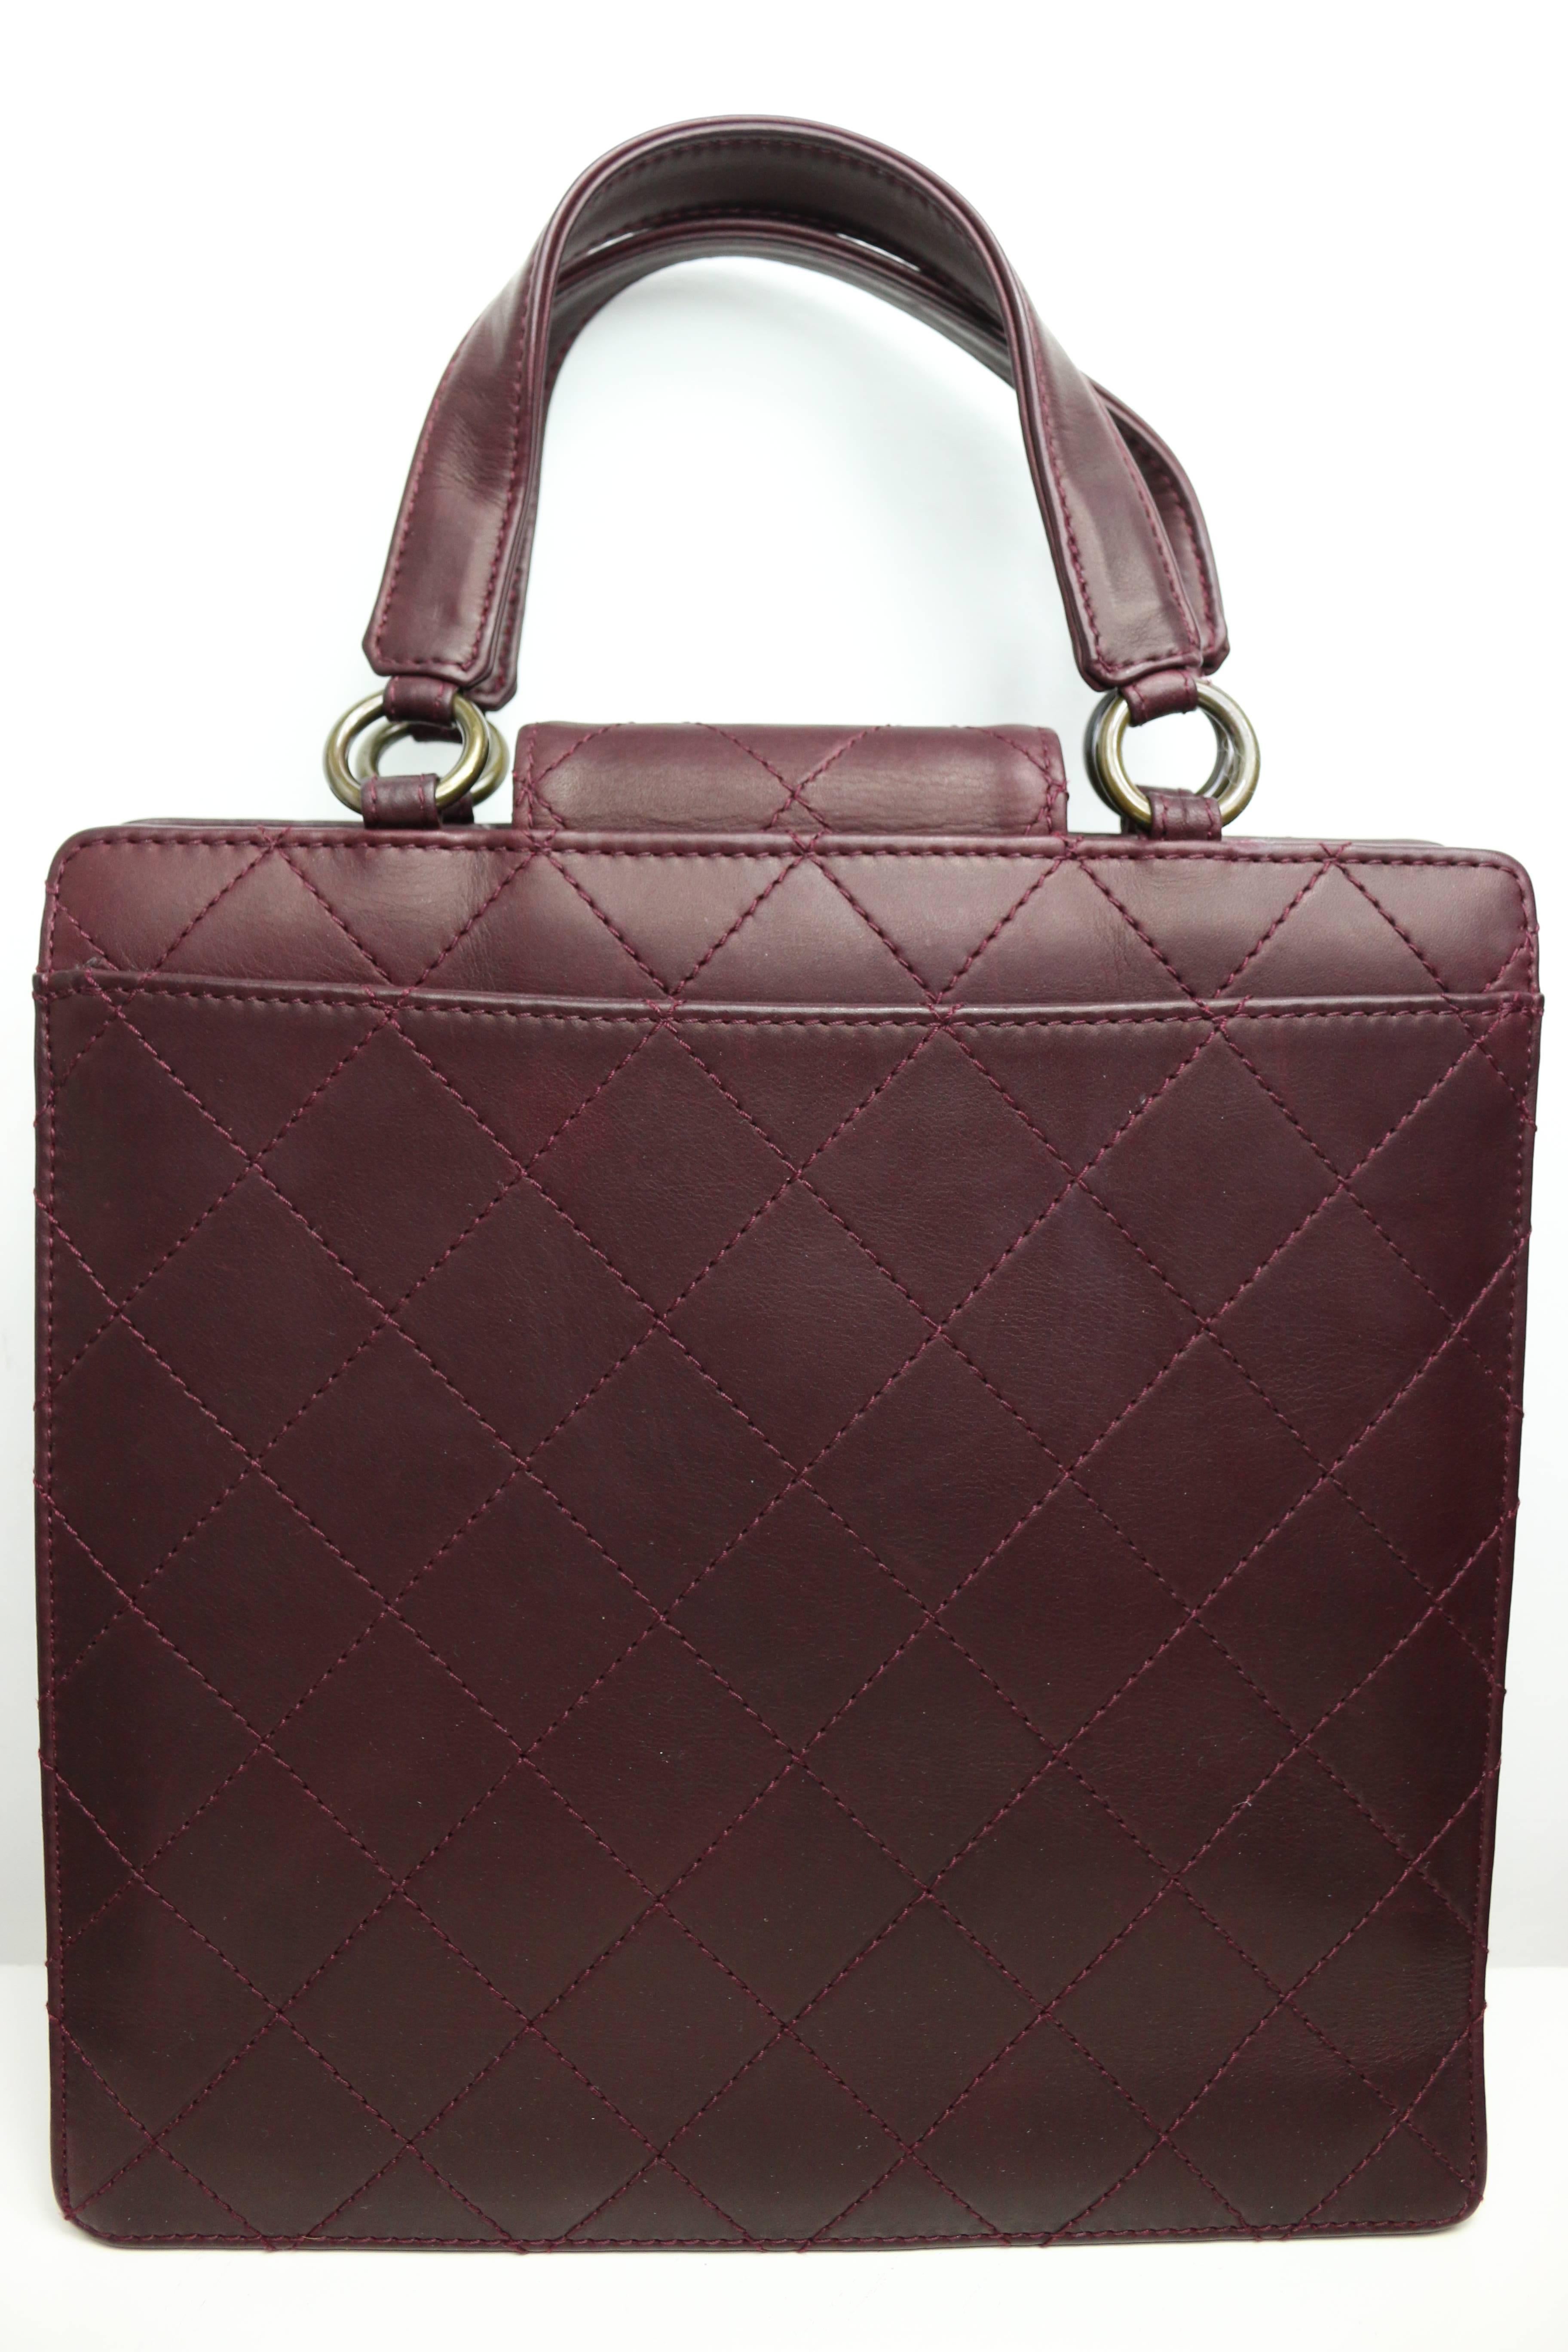 - Vintage Chanel burgundy quilted lambskin leather flap bag from 1996 to 1997. 

- Featuring two straps handle with four copper hardwares. 

- Height: 24cm I Length: 25cm I Strap: 10cm I Width: 8cm. 

- It comes with authenticity card, original box